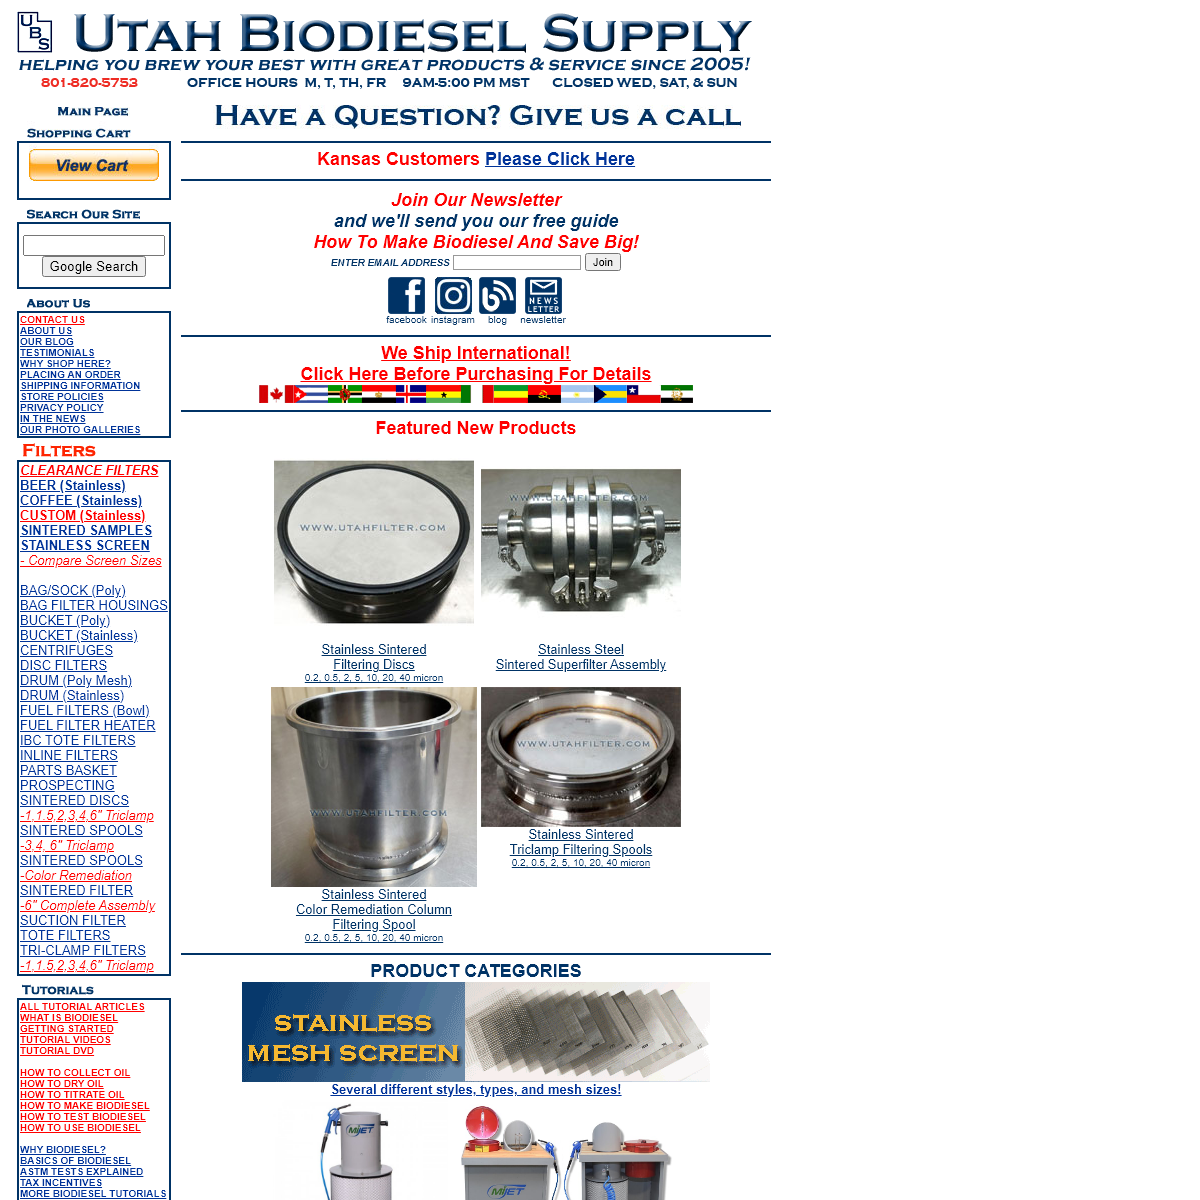 A complete backup of utahbiodieselsupply.com